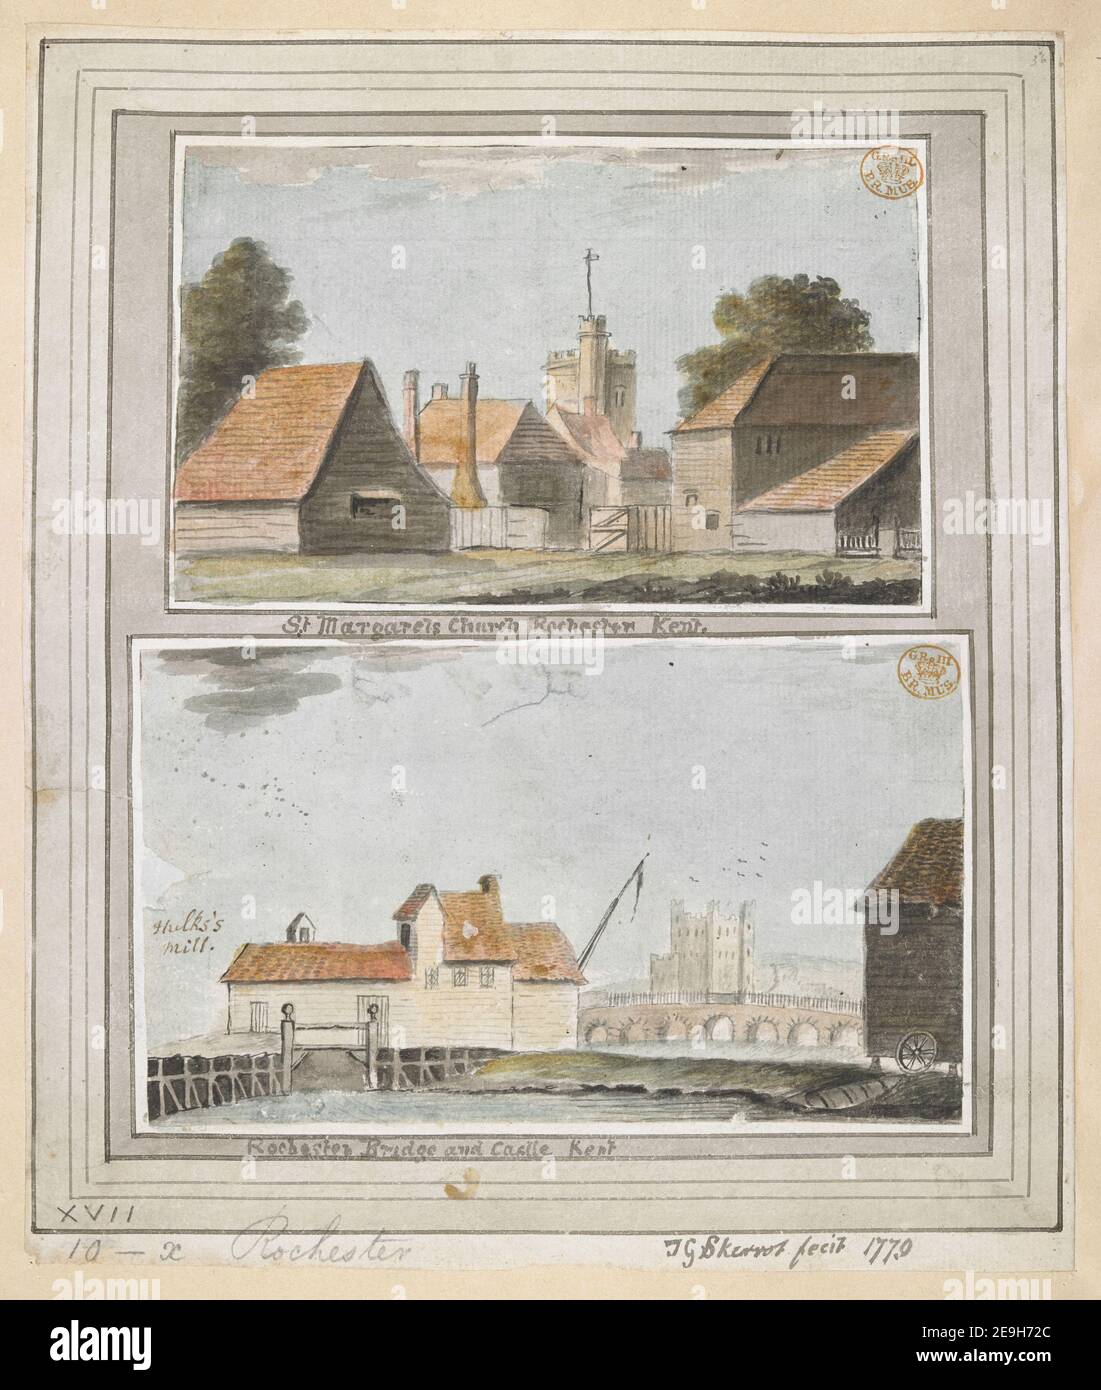 St Margarets Church Rochester Kent.  Author  Skerrot, T. G. 17.10.x. Date of publication: 1779  Item type: 1 drawing Medium: pen and black ink and watercolour Dimensions: sheet 9.1 x 14.8 cm; sheet 9.4 x 16.2 cm; within washline mount 24.6 x 20.8 cm  Former owner: George III, King of Great Britain, 1738-1820 Stock Photo